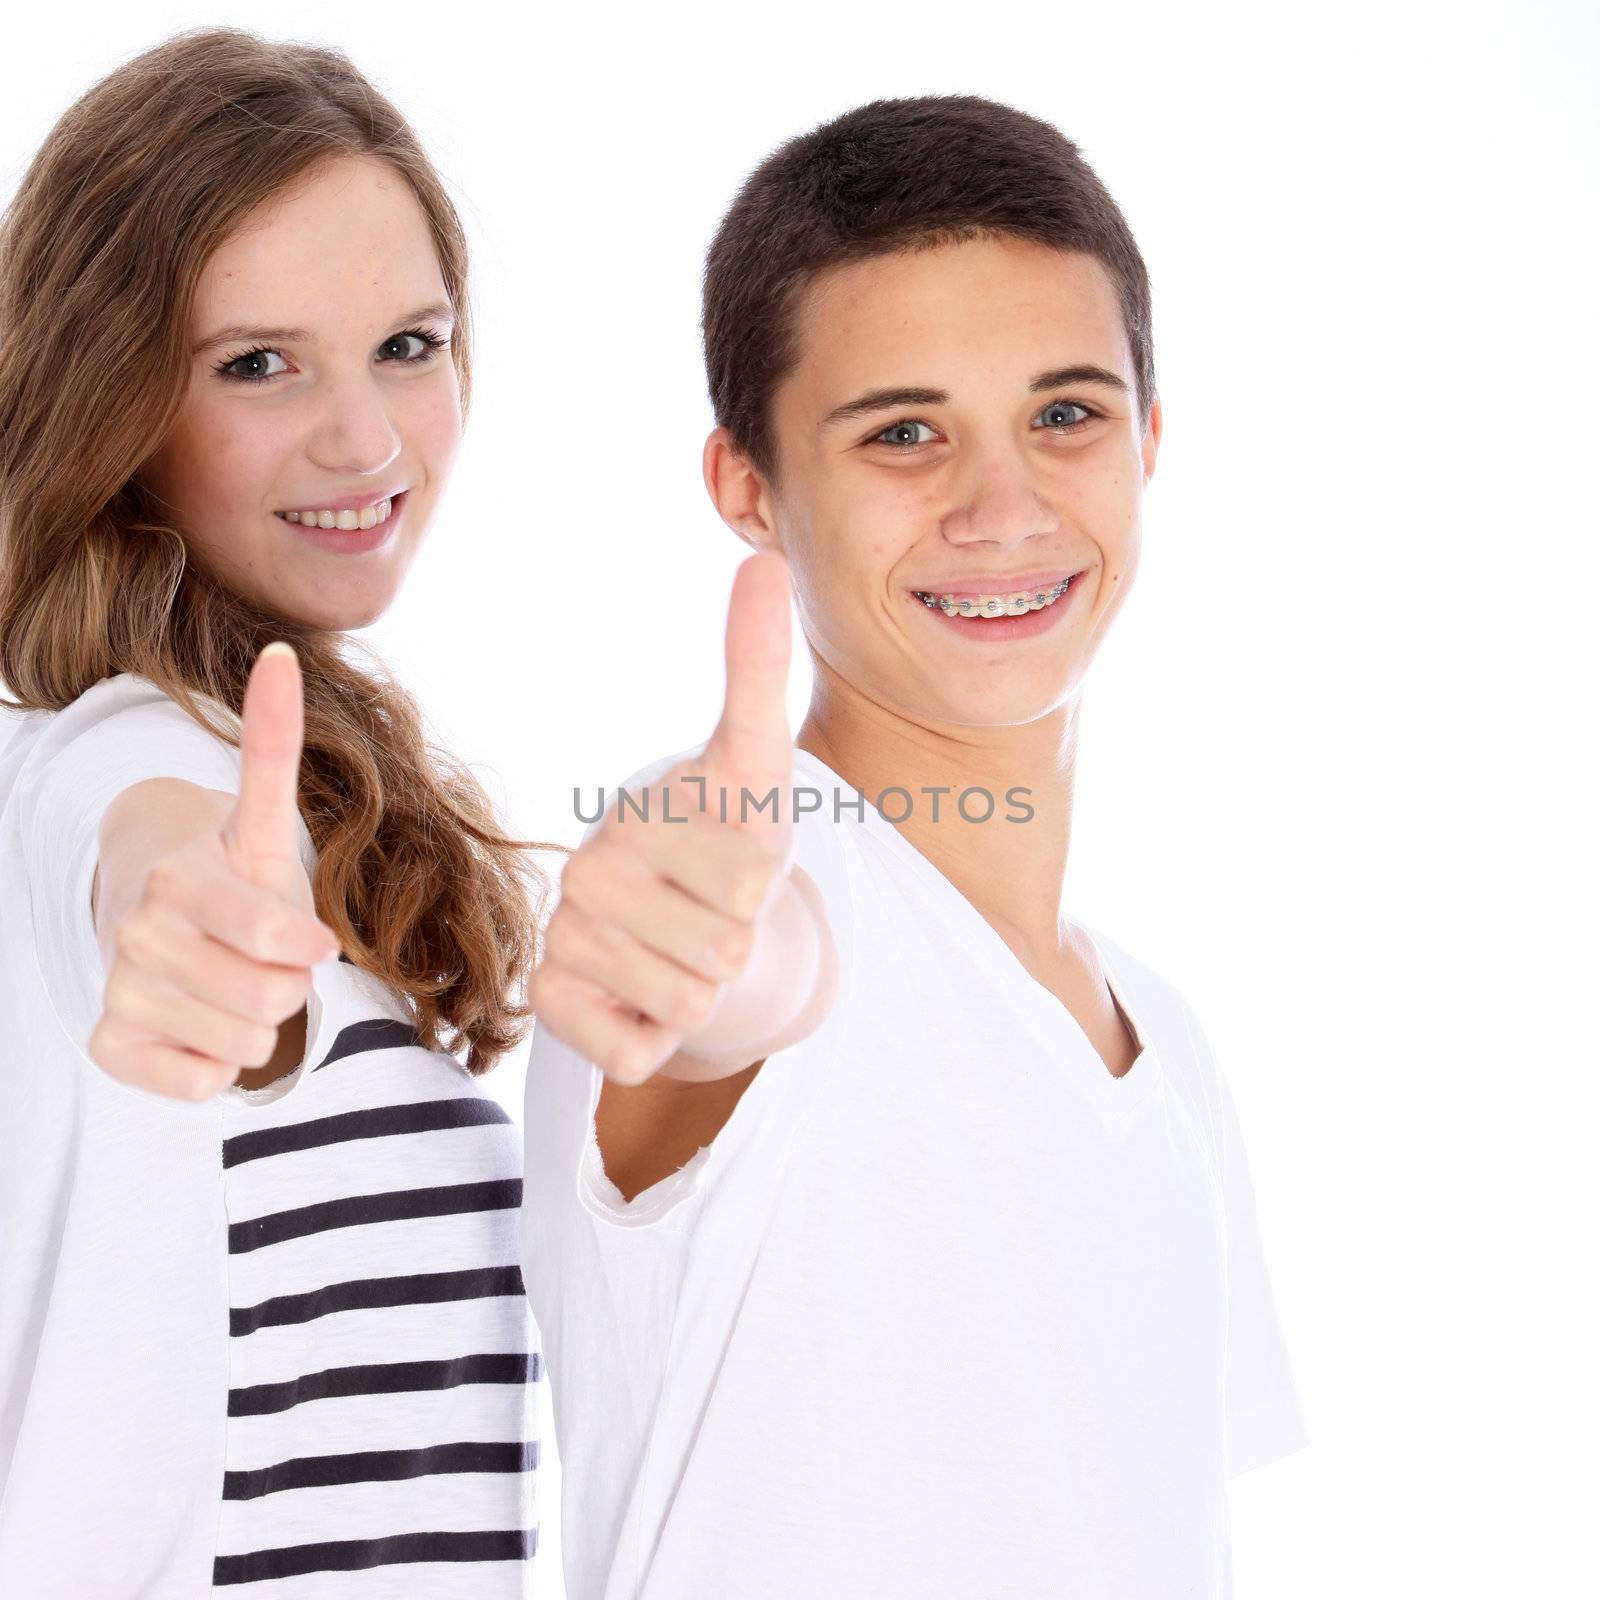 A happy teenage boy and girl giving a thumbs up of success and approval isolated on white A happy teenage boy and girl giving a thumbs up on success and approval isolated on white